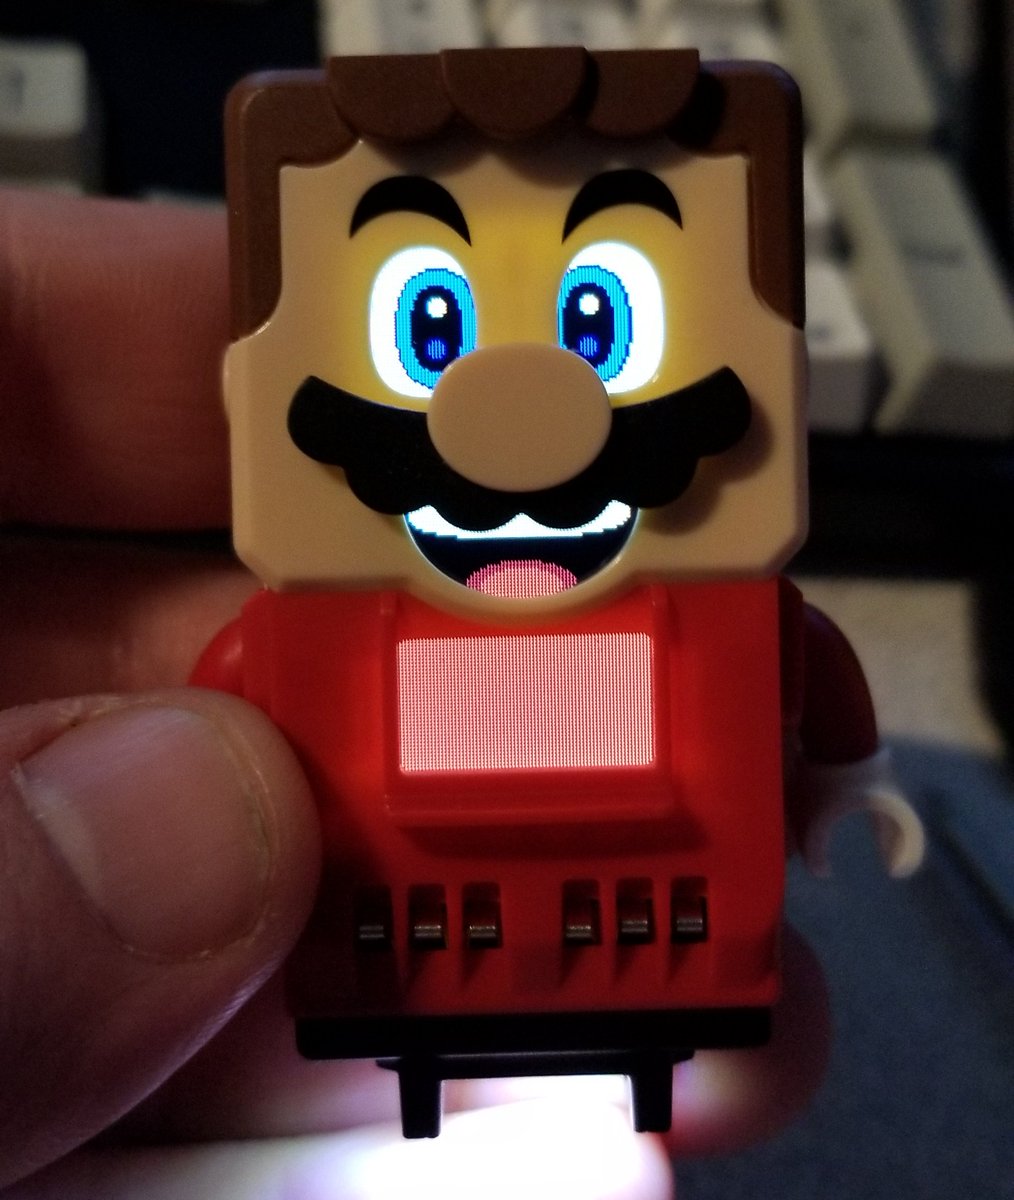 And here's the mario! With batteries, but not put together otherwise.He's got eyes that blink, a mouth, and a red belly.